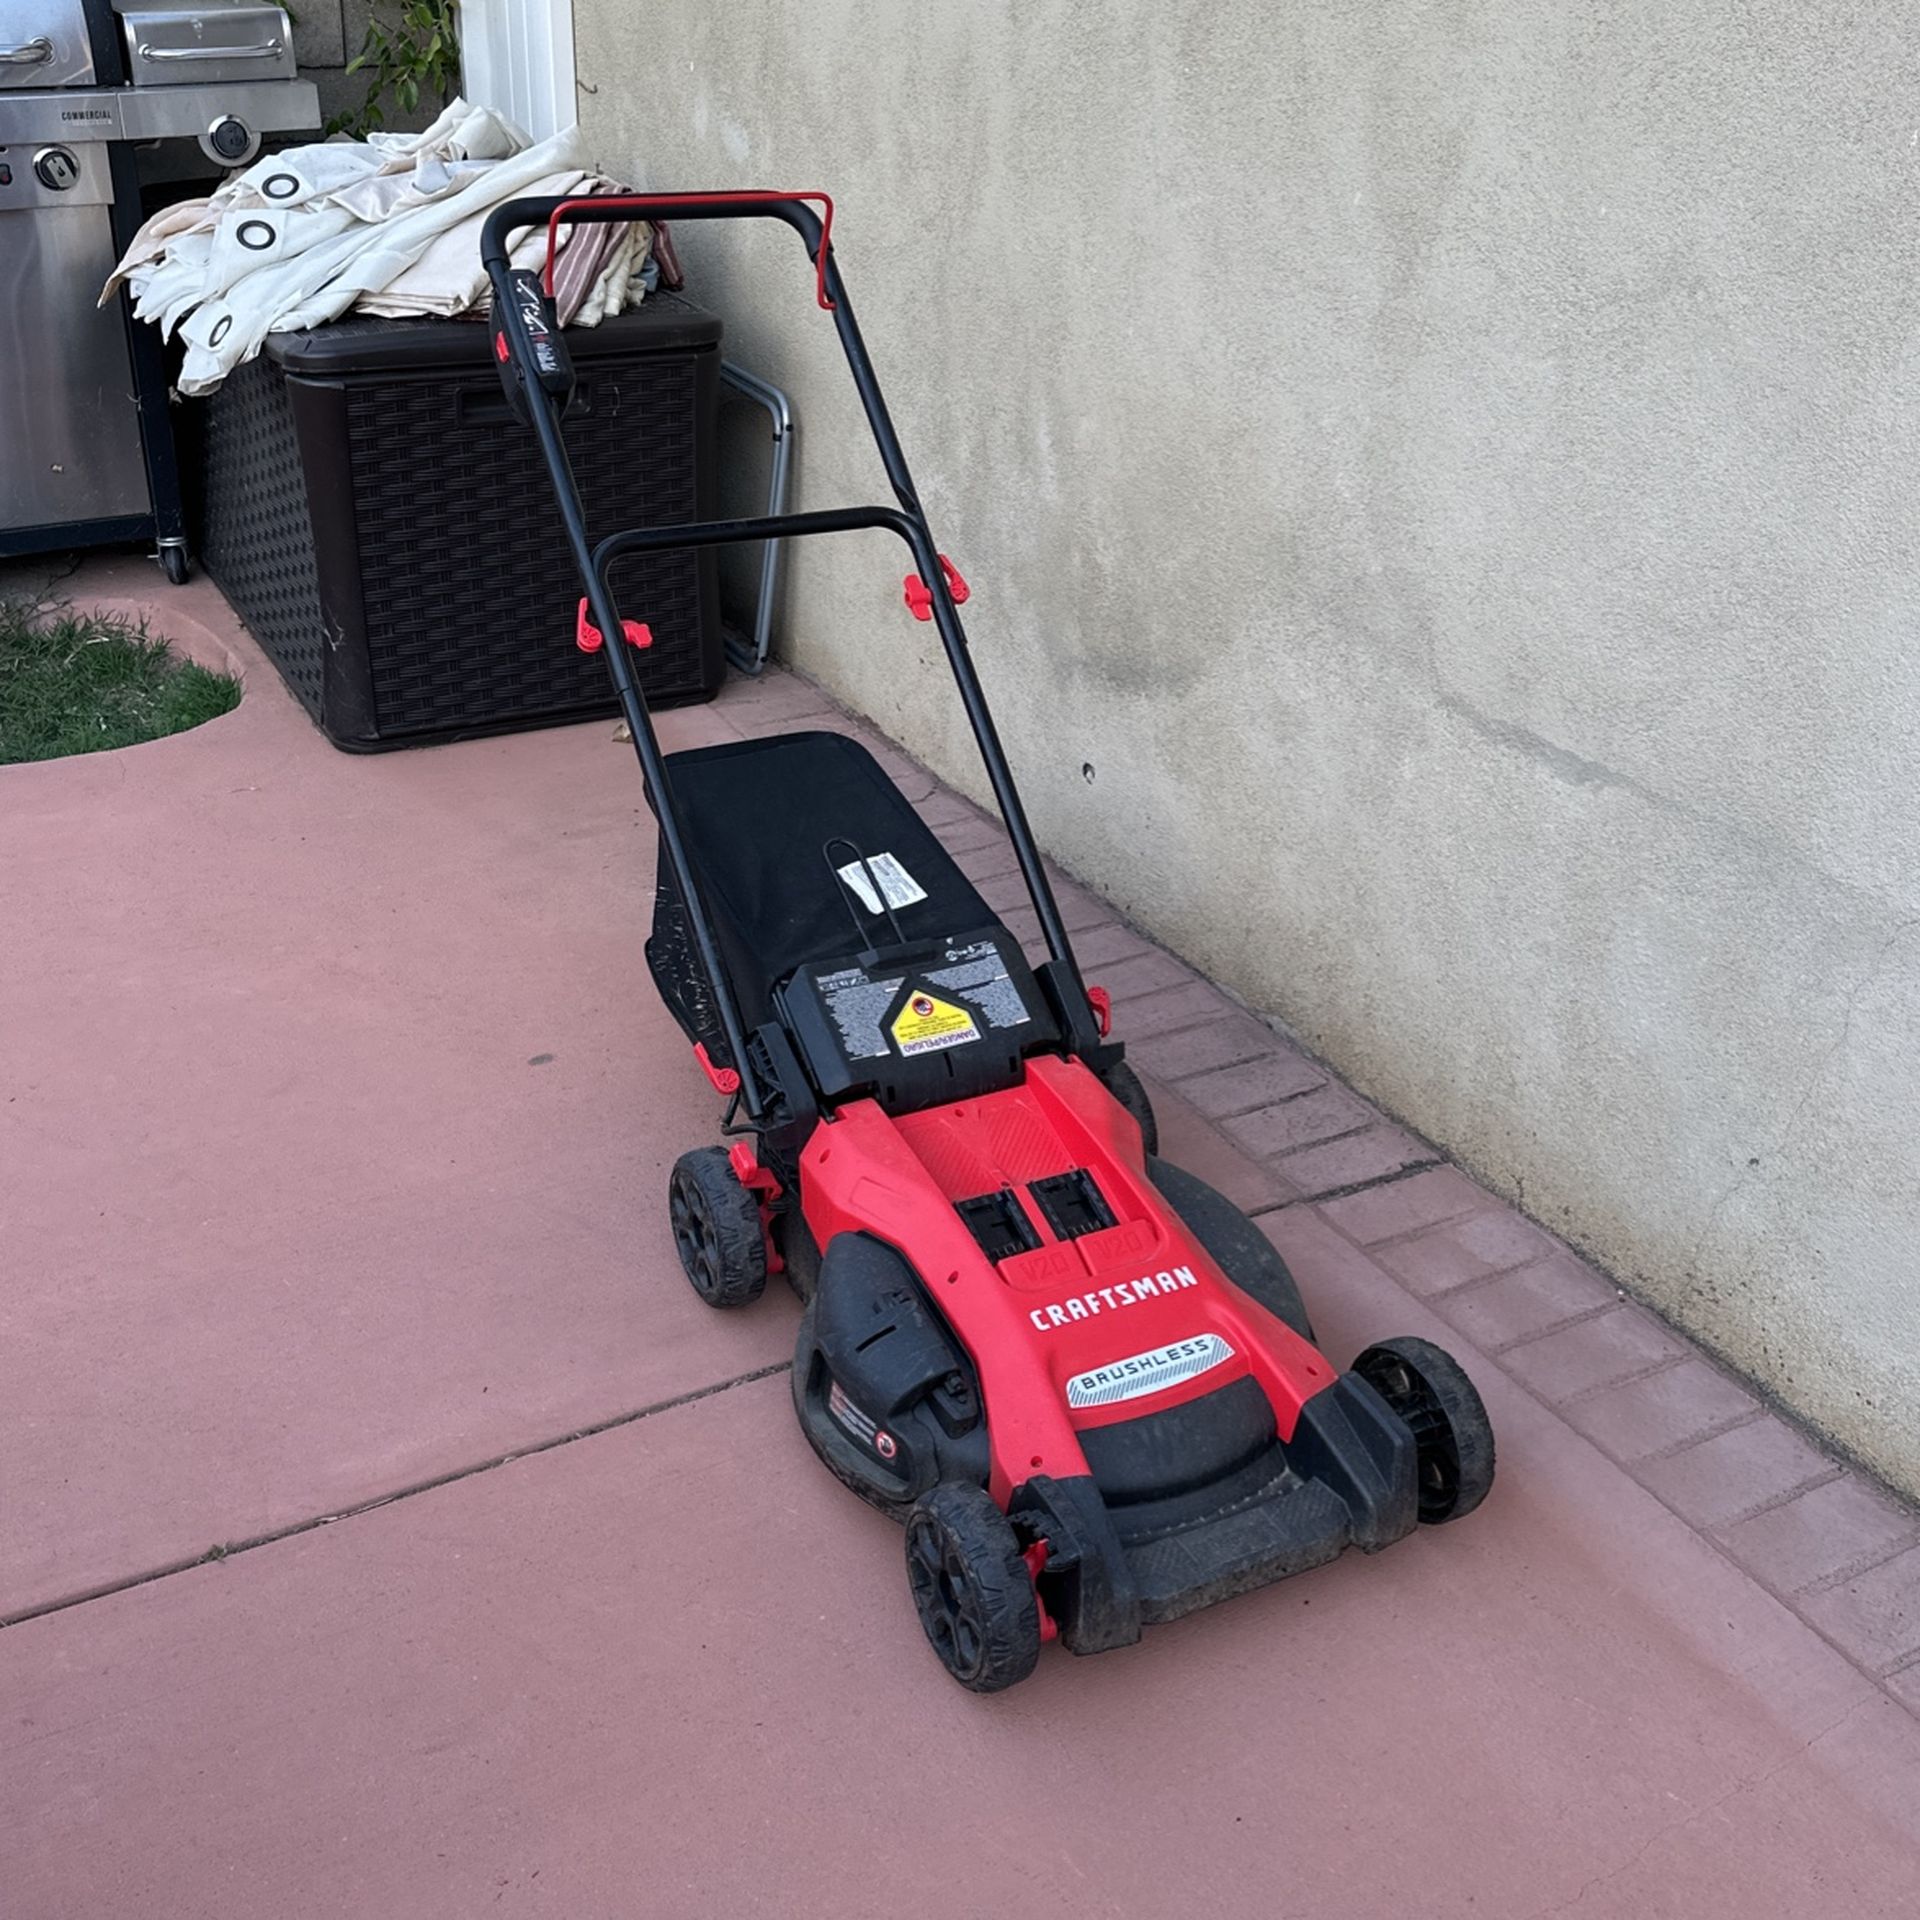 Craftsman lawnmower Like New Used Only Maybe 10 Times 